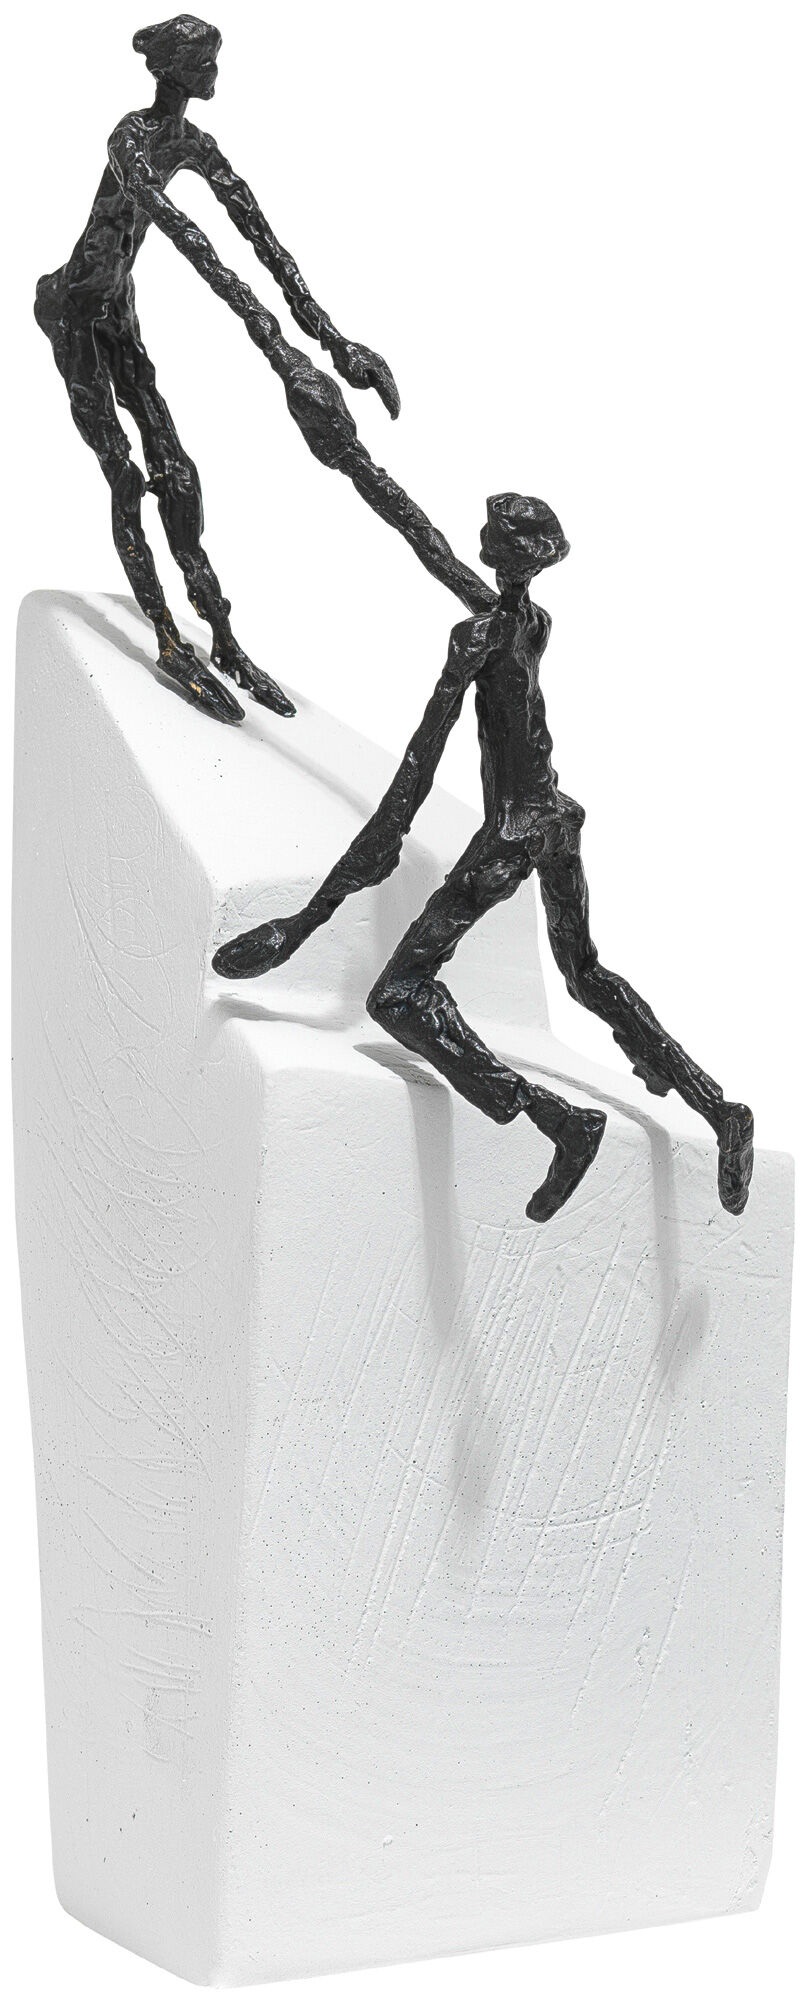 Sculpture "Together We Can Do It III", bronze on cast stone by Luise Kött-Gärtner